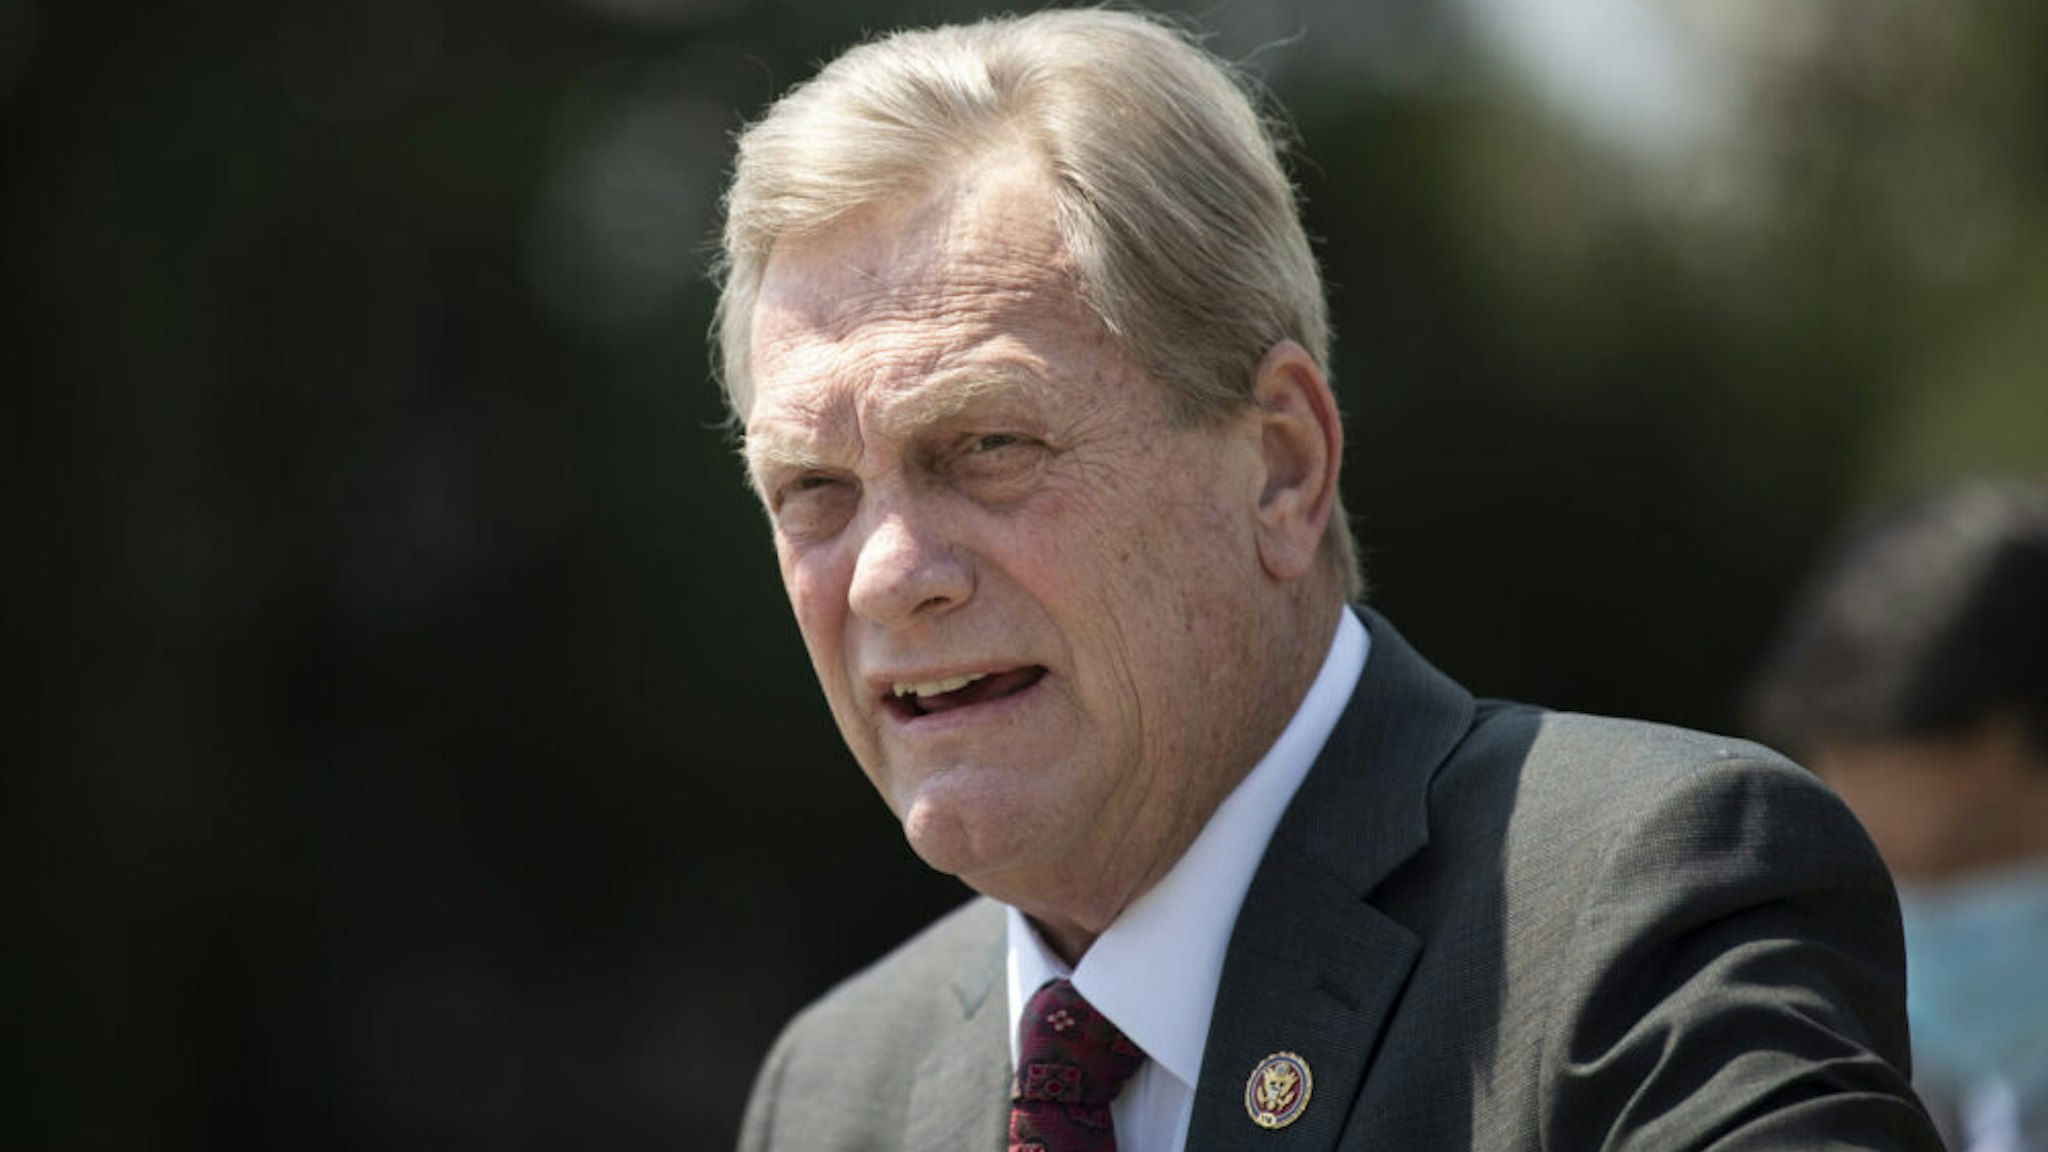 UNITED STATES - JULY 22: Rep. Mike Simpson, R-Idaho, speaks during a news conference on the Great American Outdoors Act in the Capitol in Washington on Wednesday, July 22, 2020.